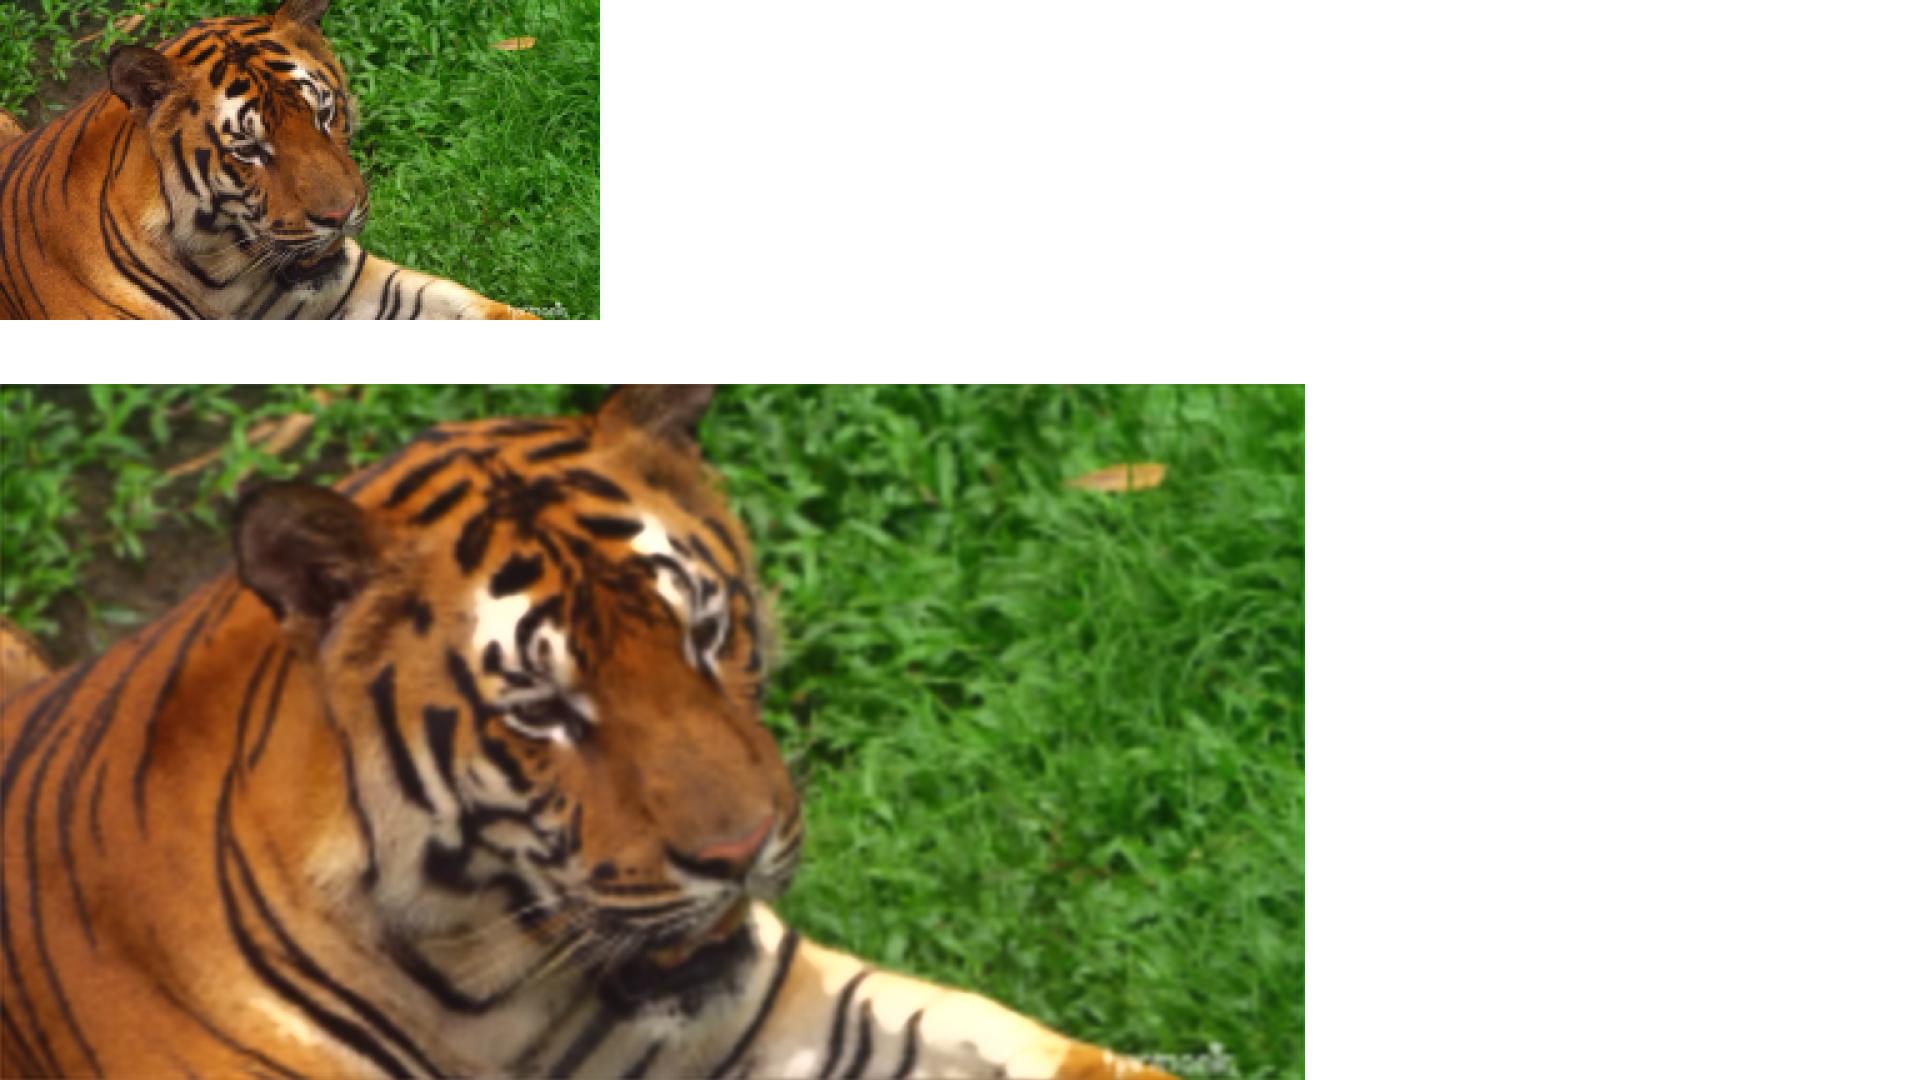  DALI supports data loading operators for video processing using an image of a tiger